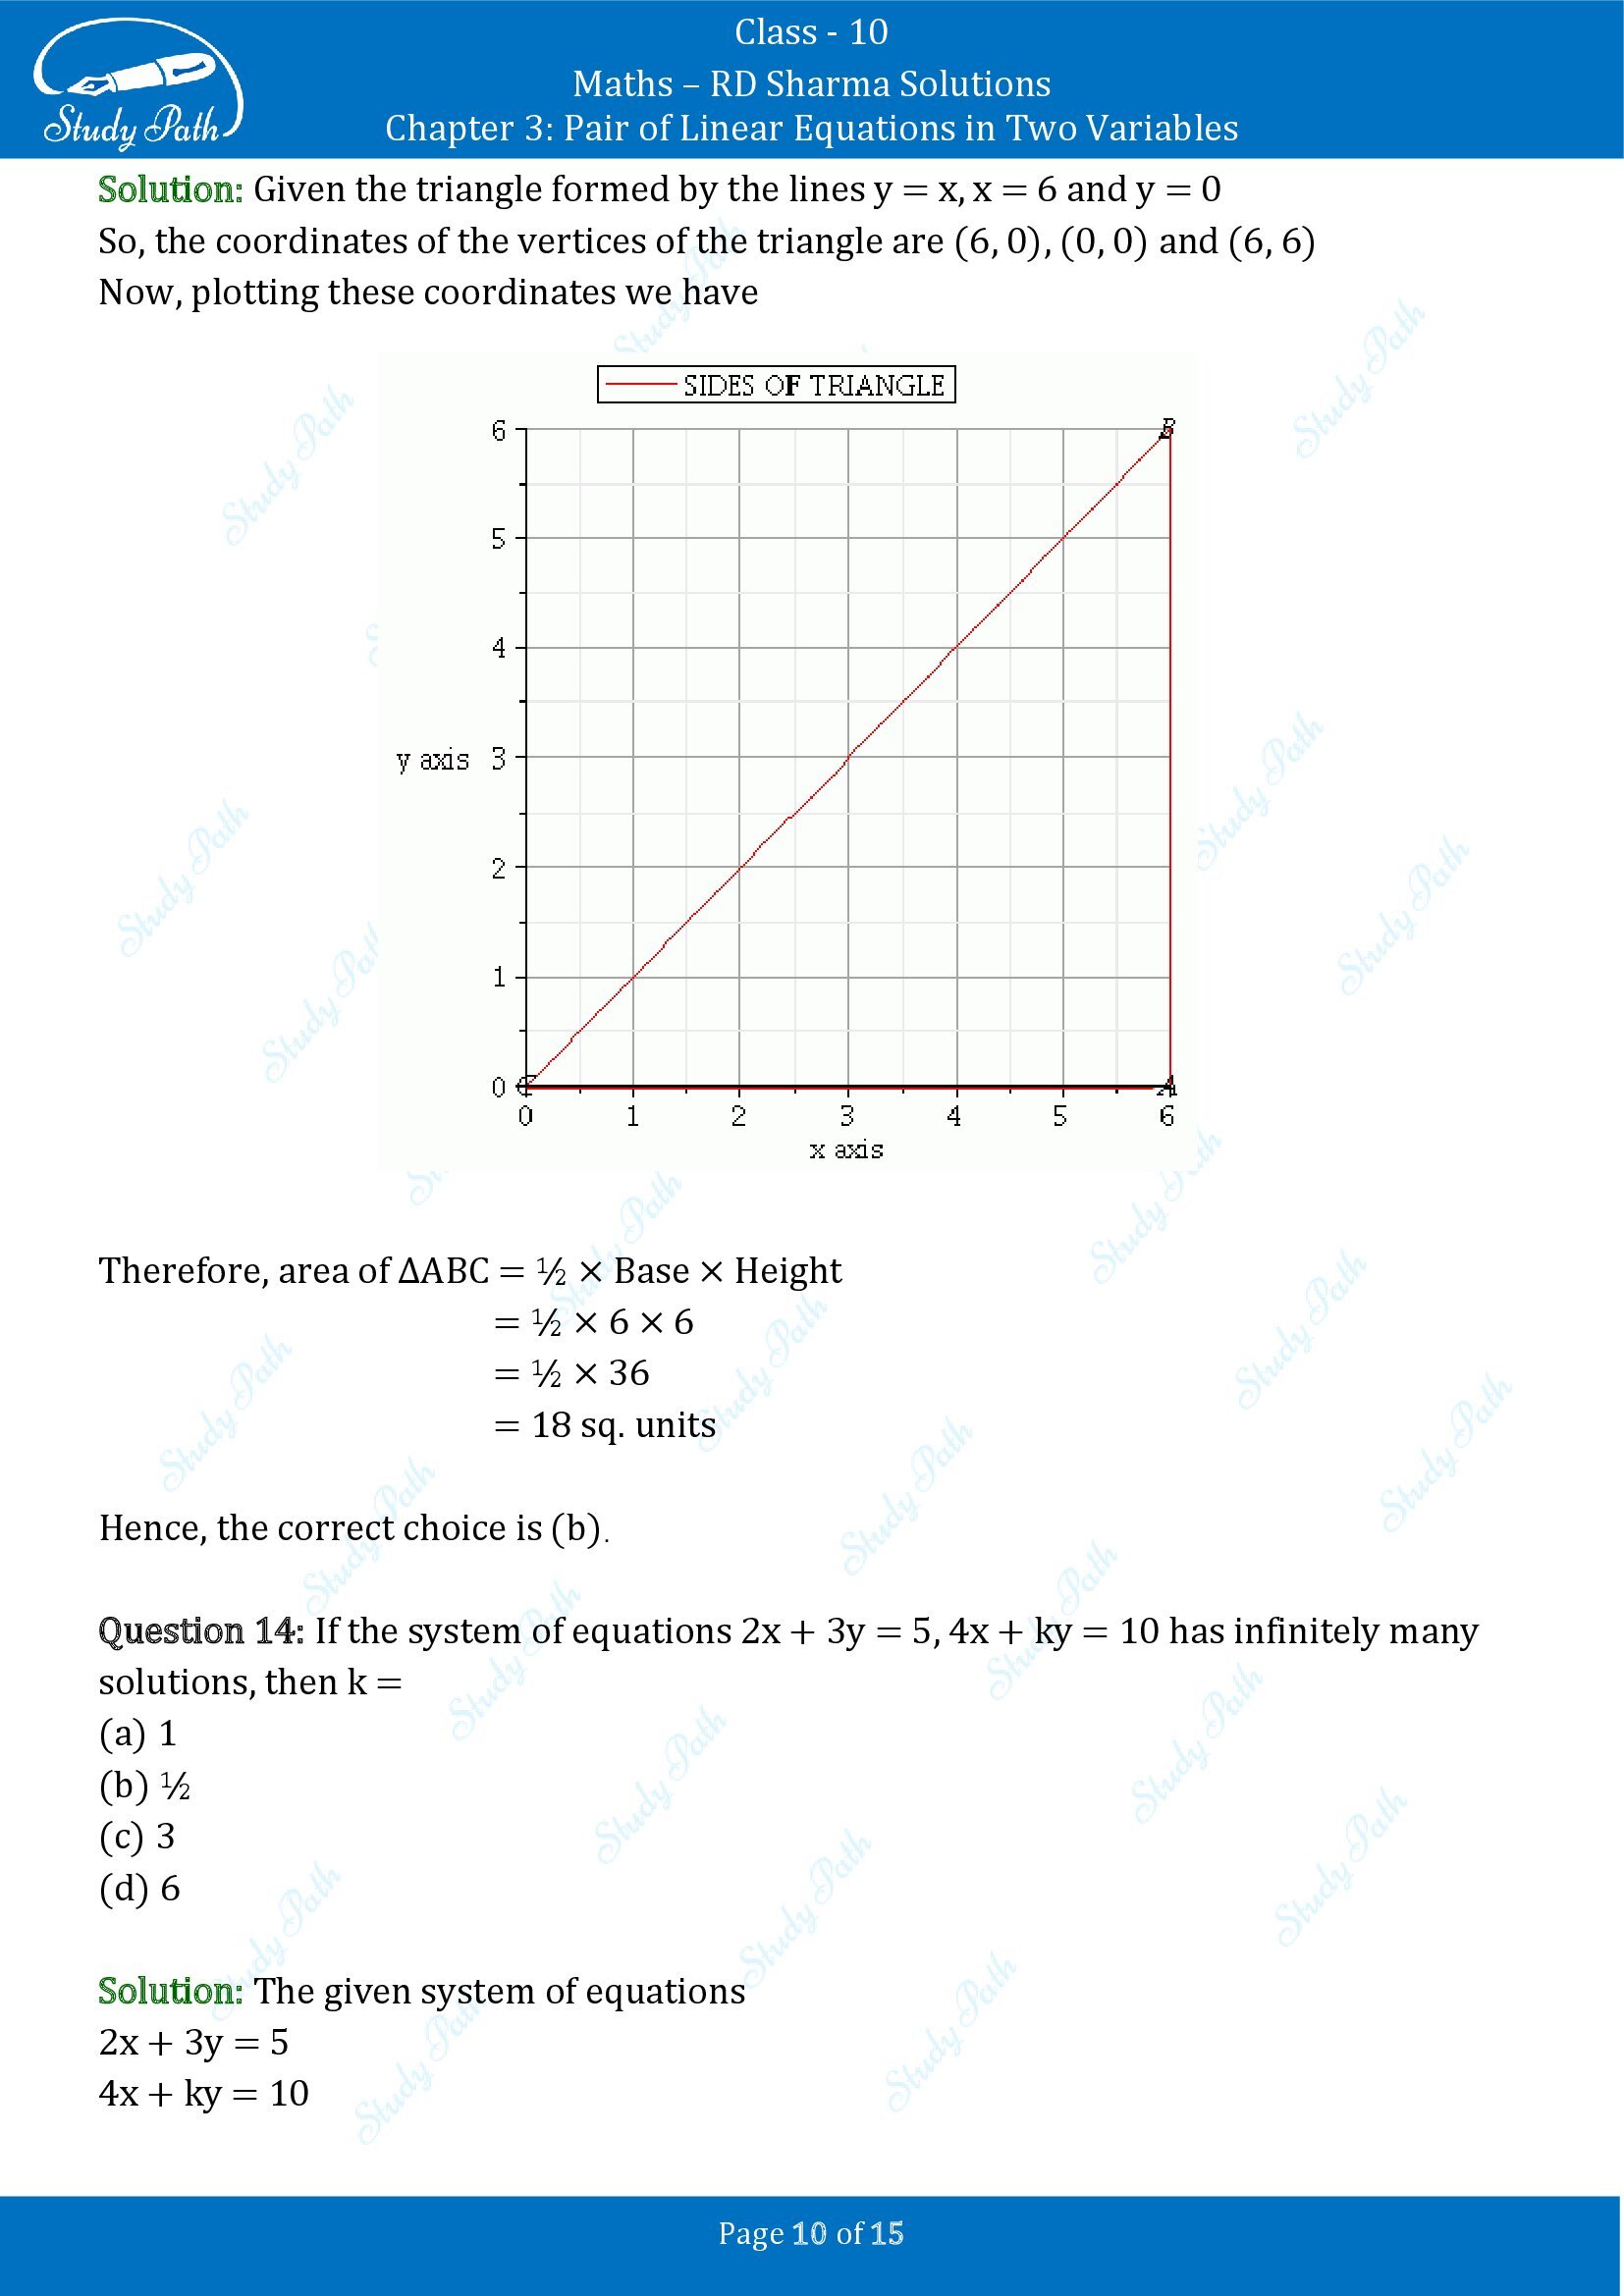 RD Sharma Solutions Class 10 Chapter 3 Pair of Linear Equations in Two Variables Multiple Choice Questions MCQs 00010